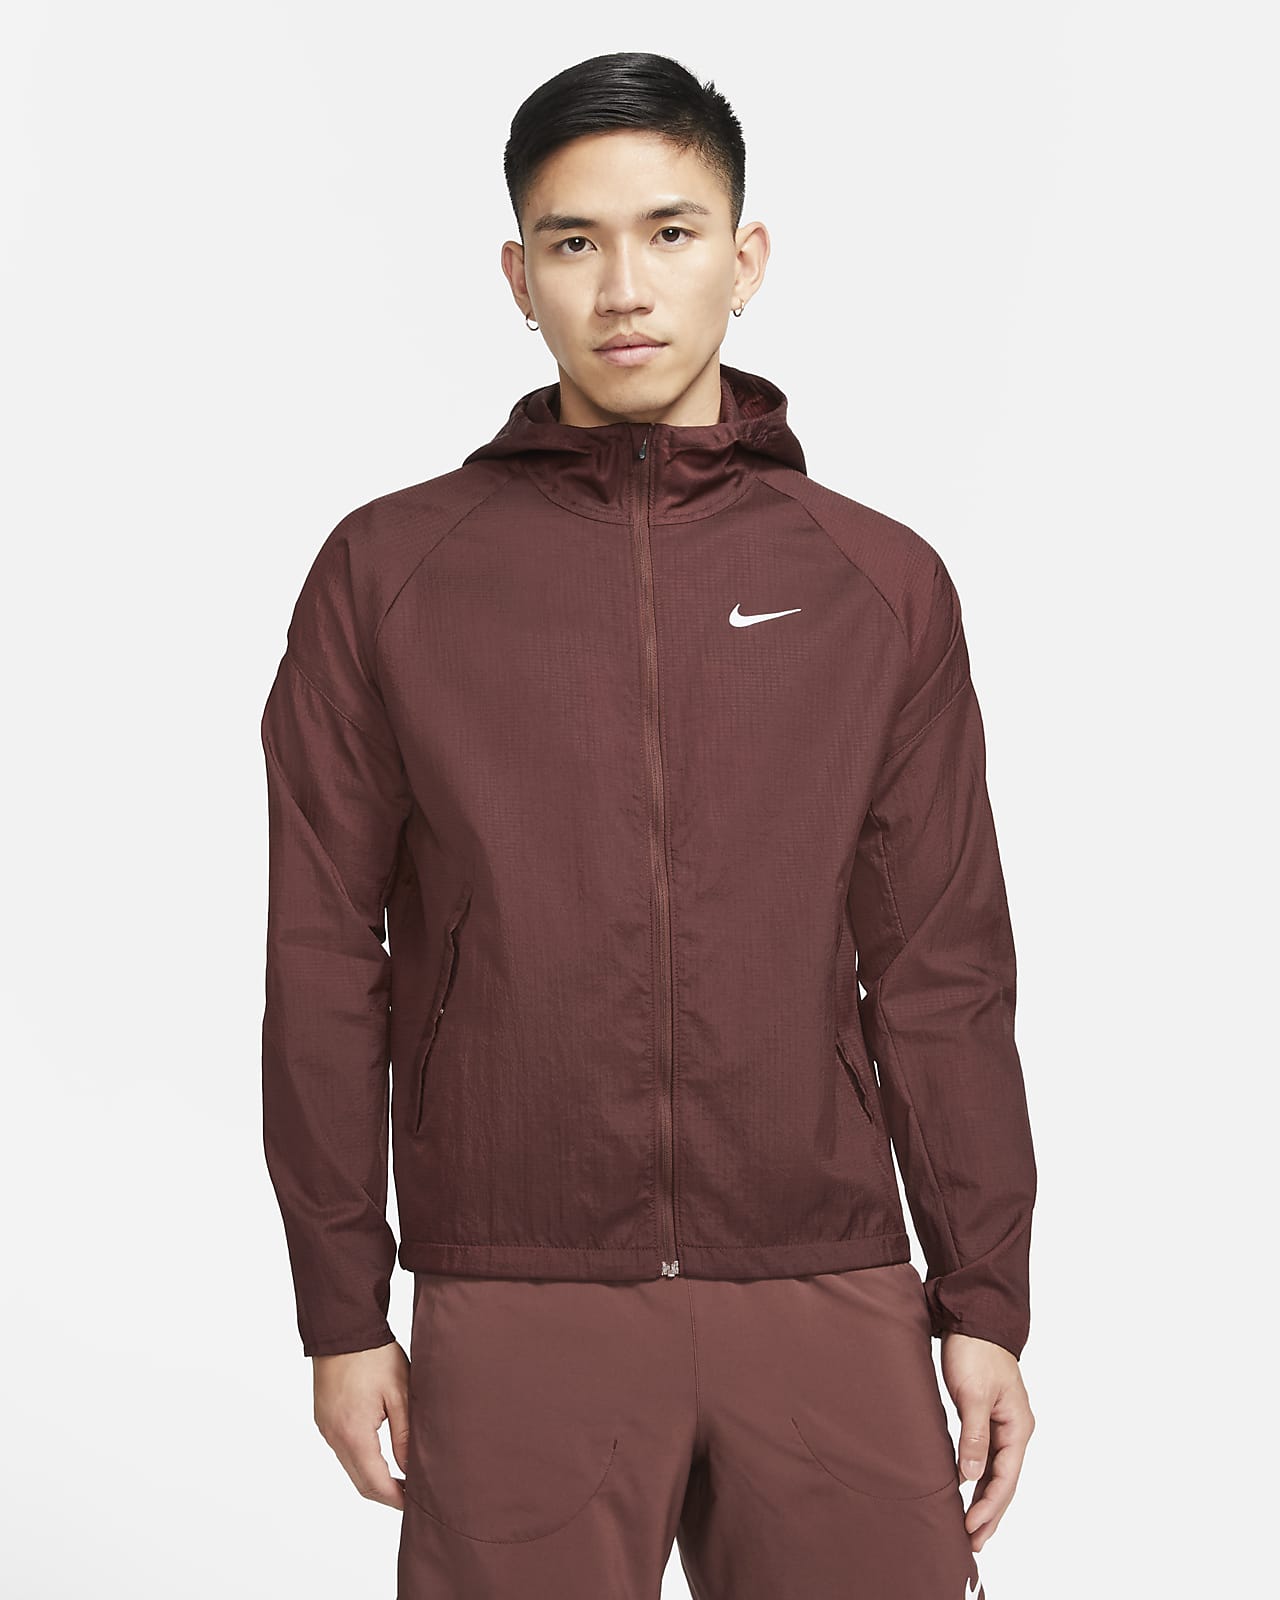 nike running suits mens